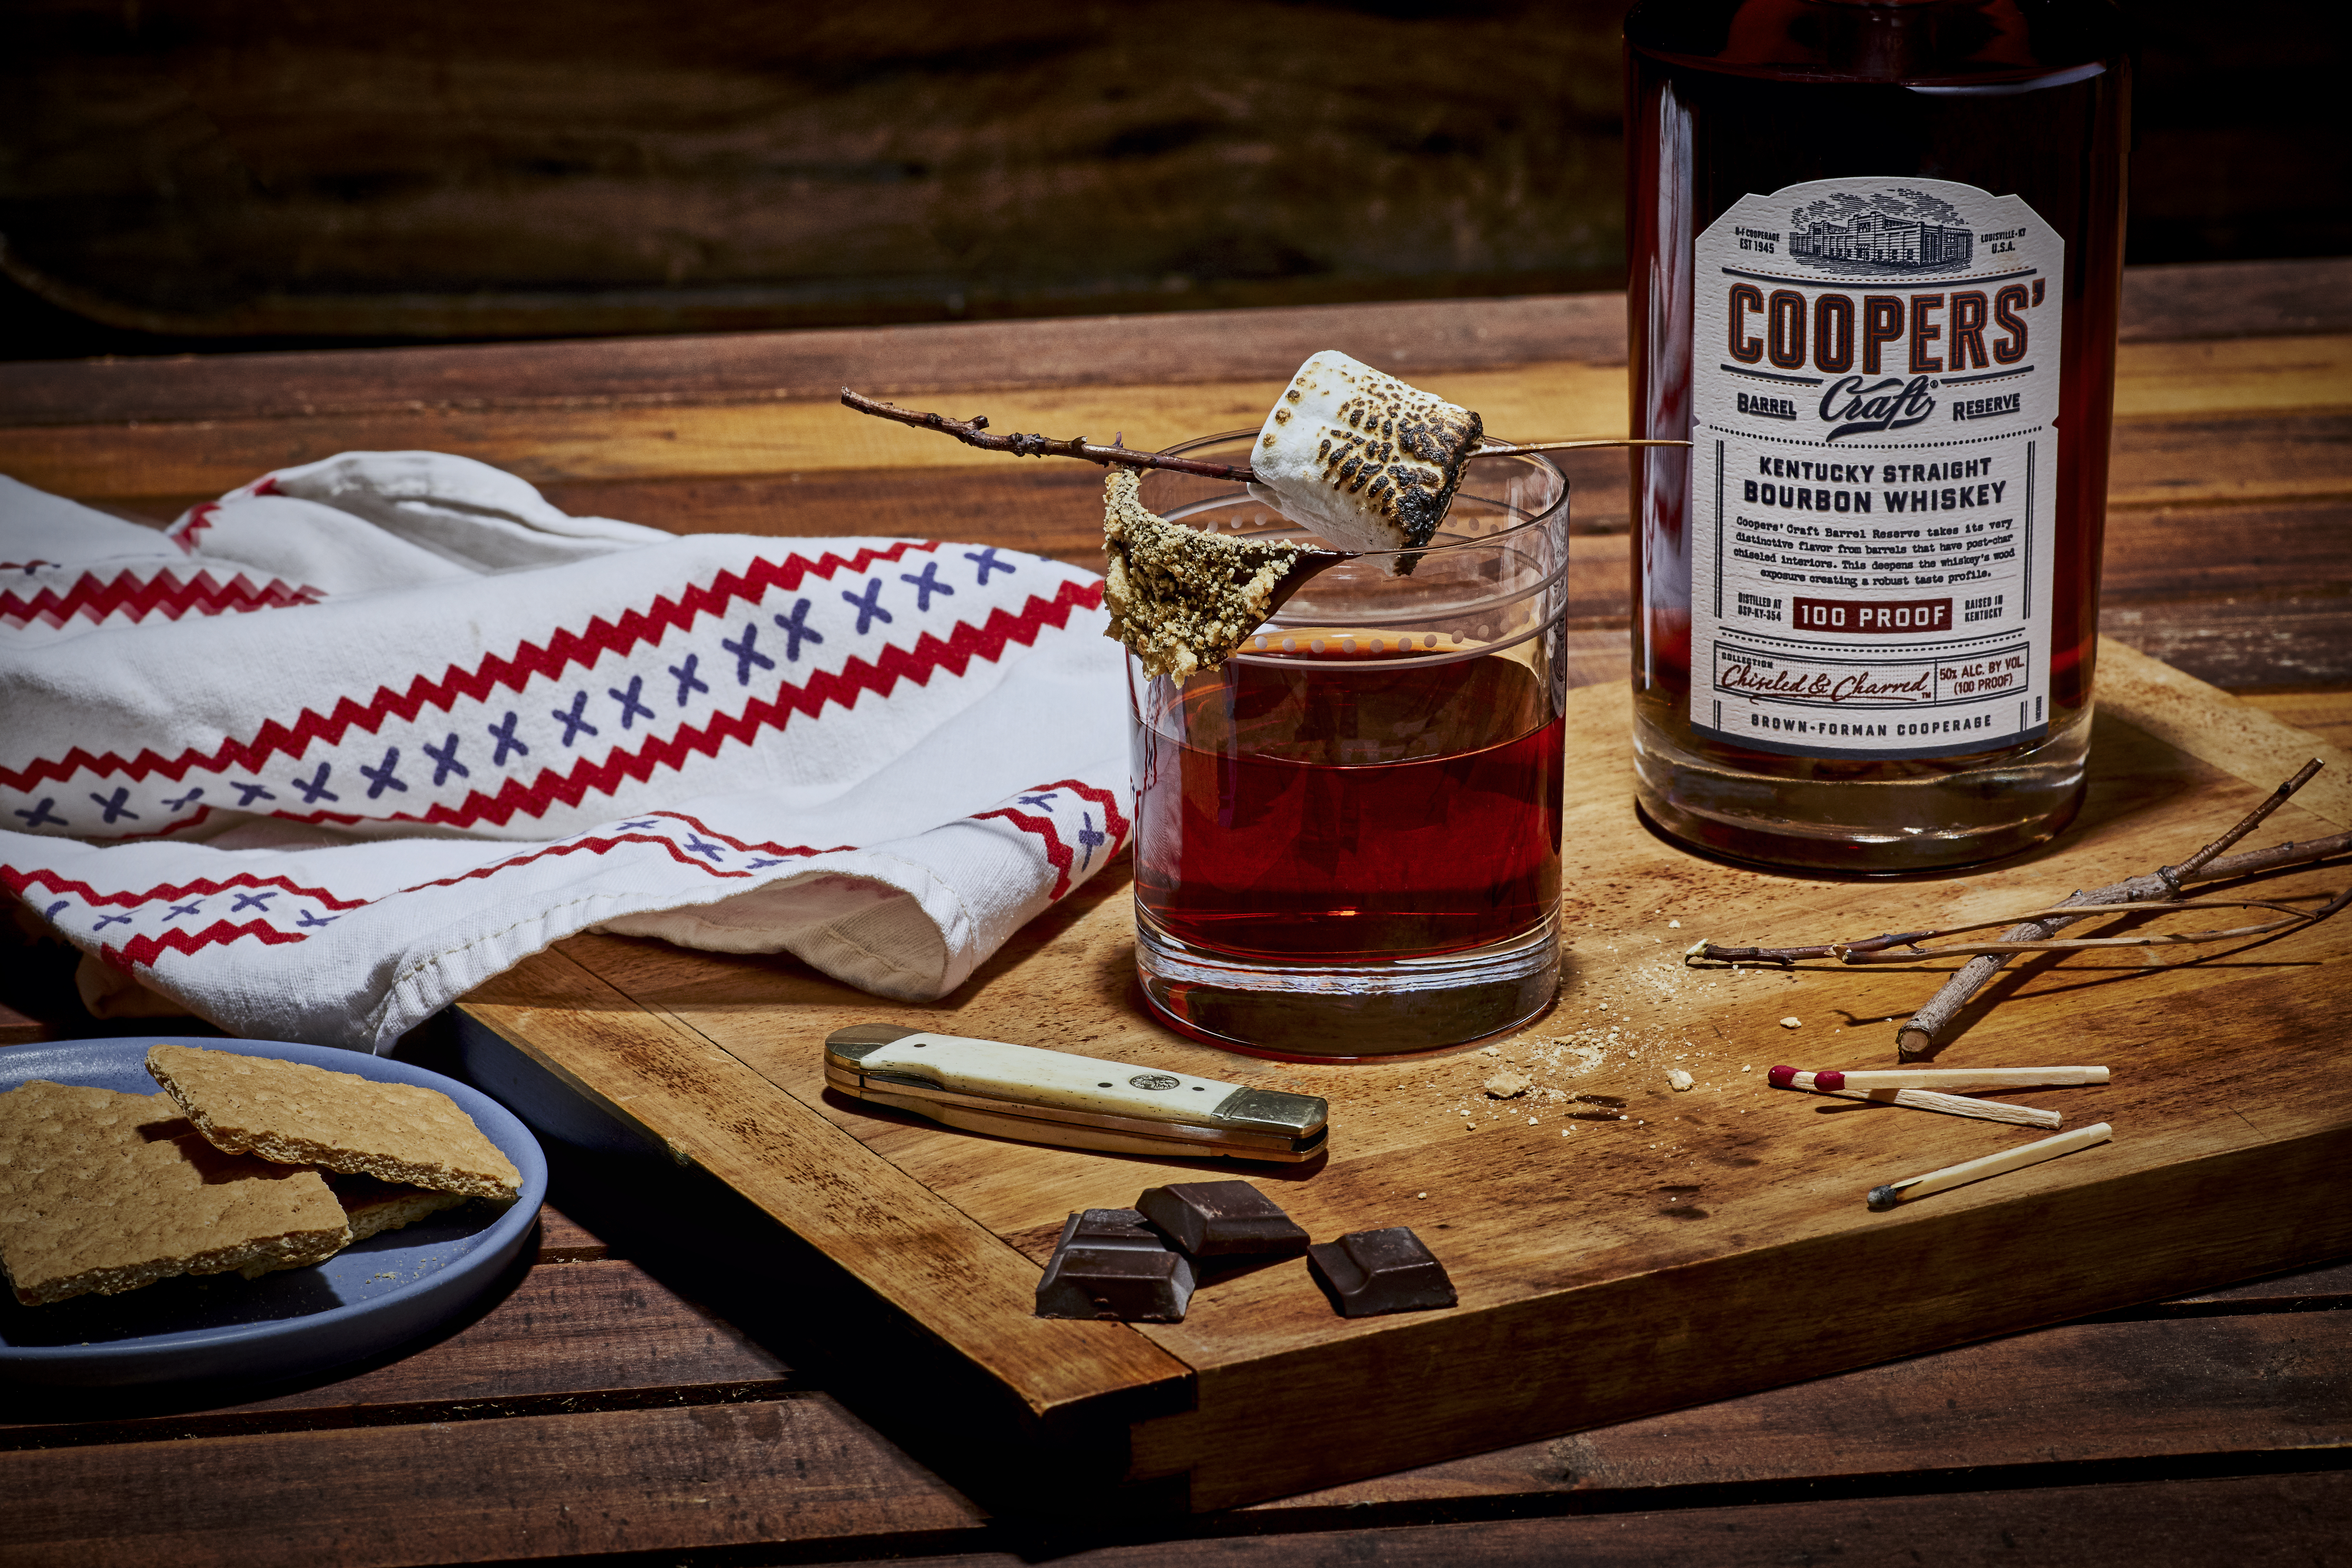 Celebrate the Summer of S’mores with Coopers’ Craft Bourbon